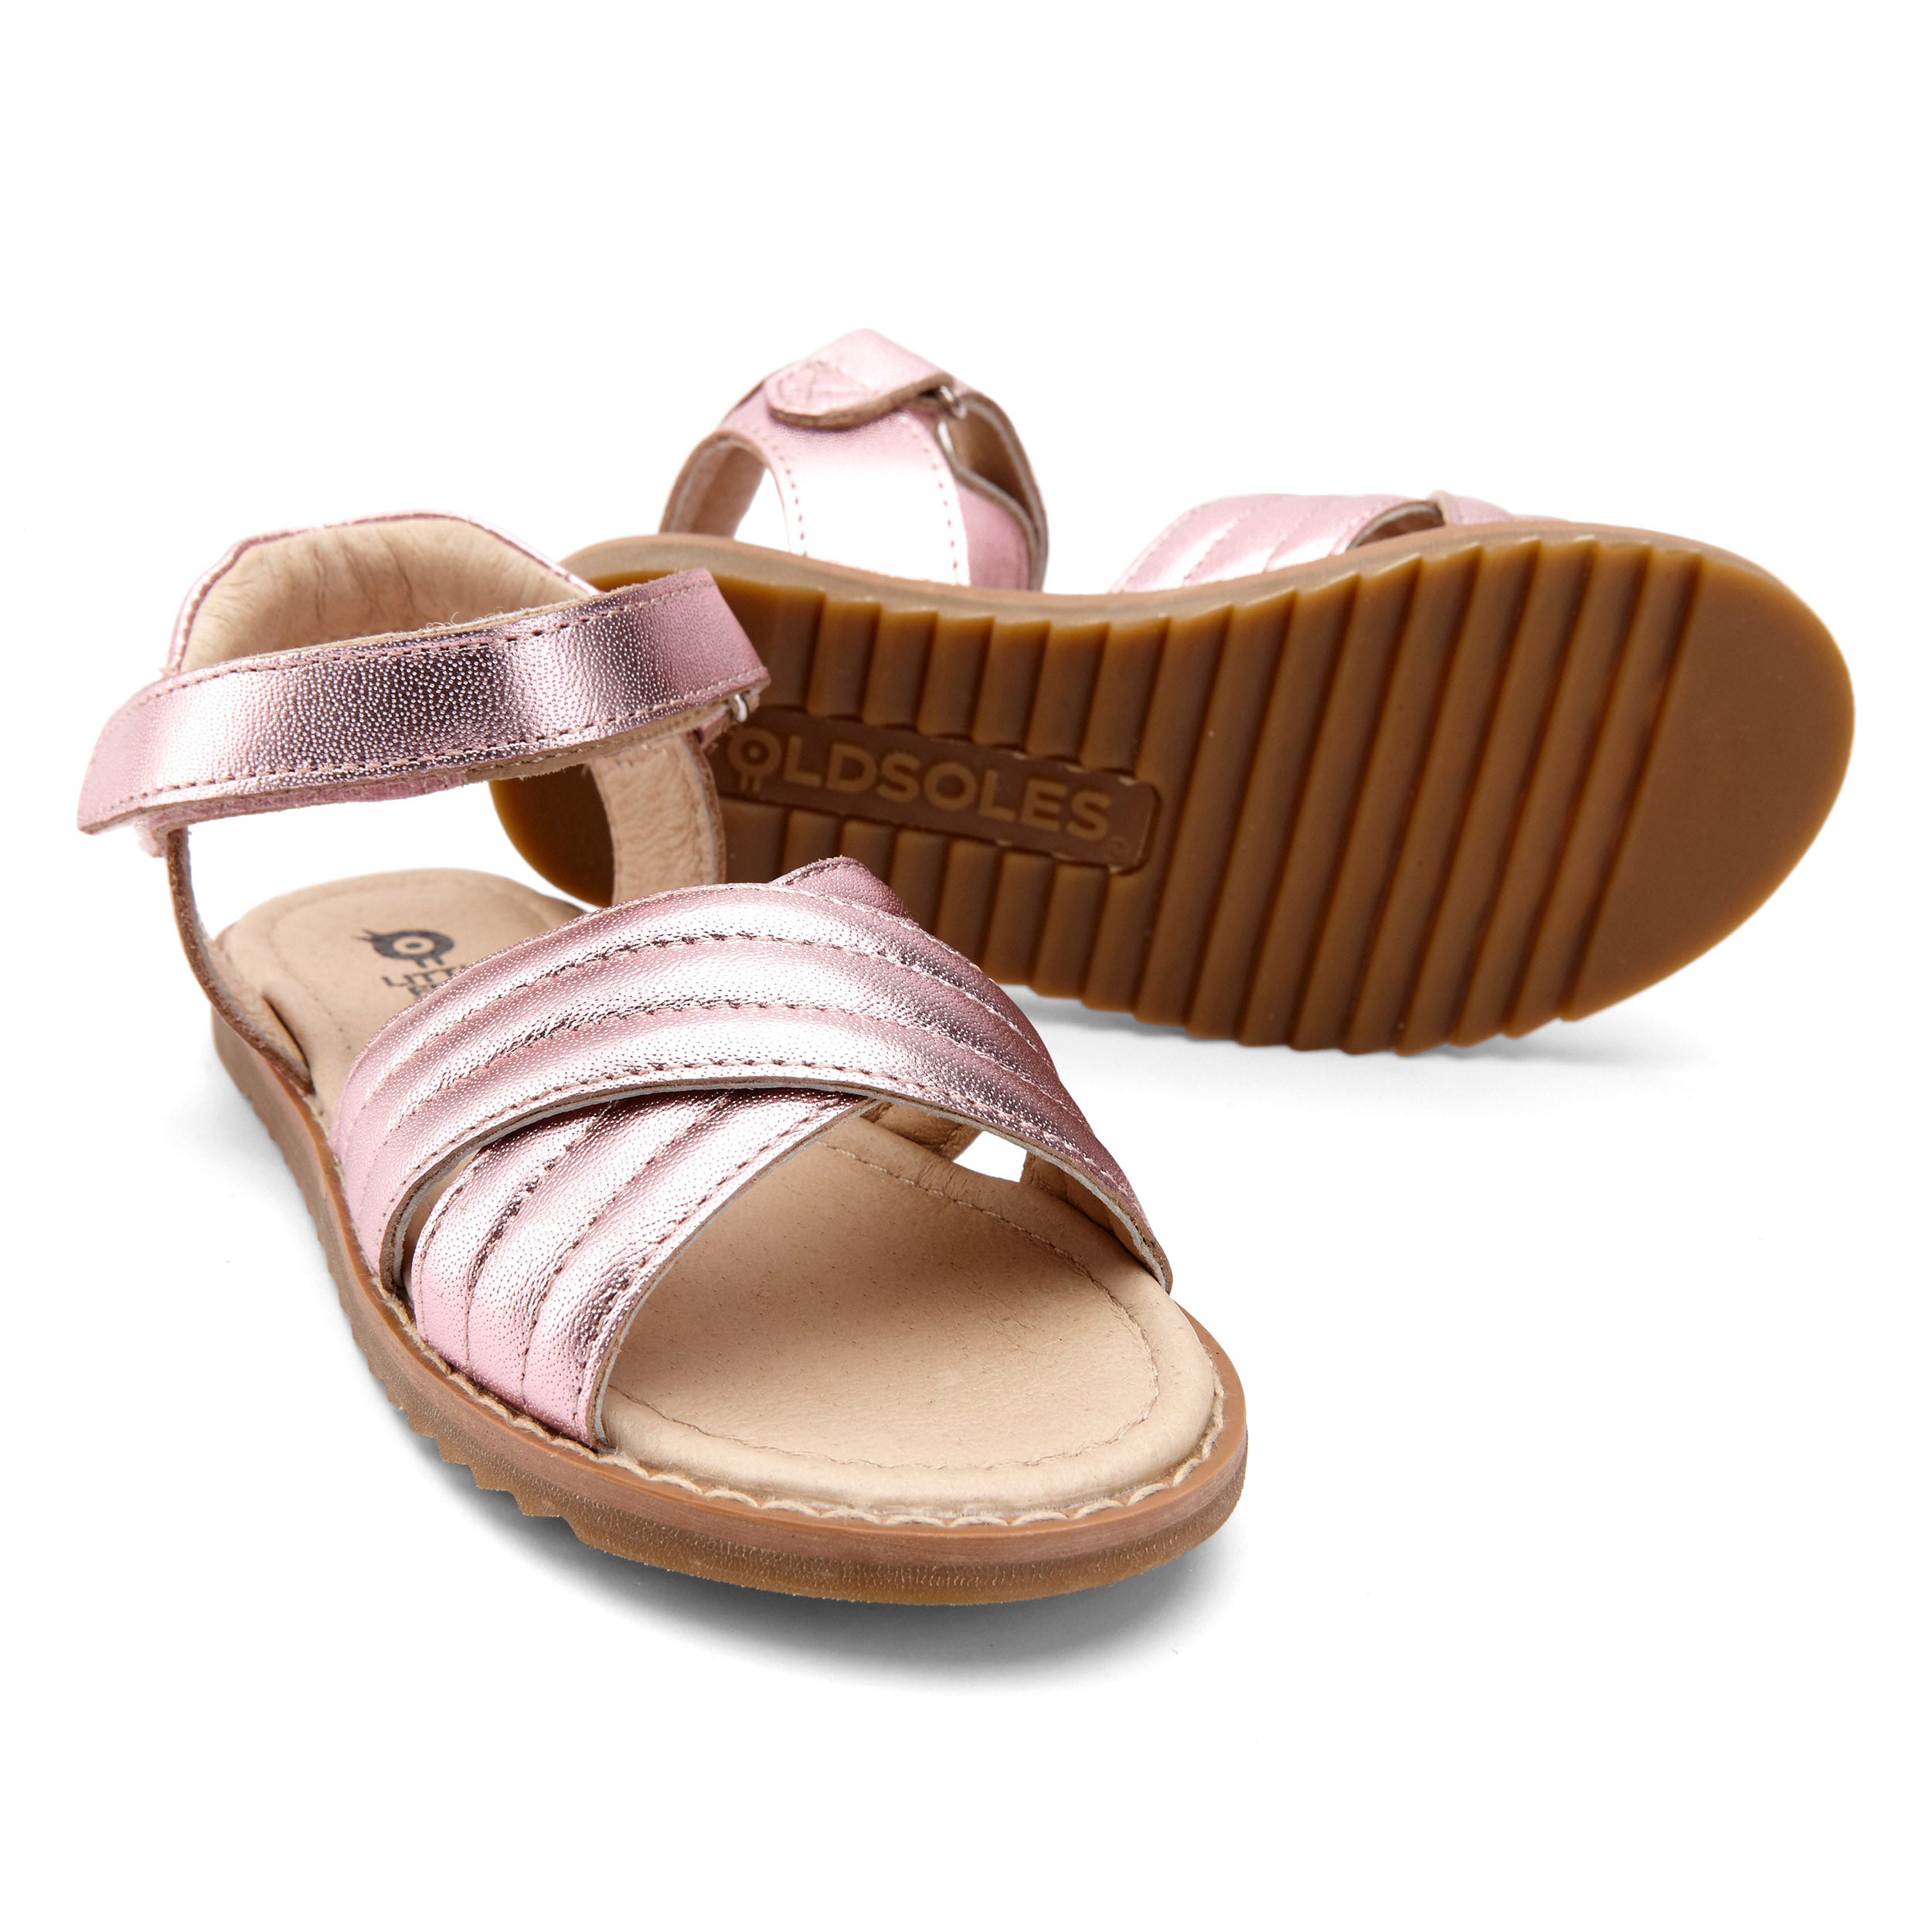 Old Soles - My Pad Sandals Pink Frost